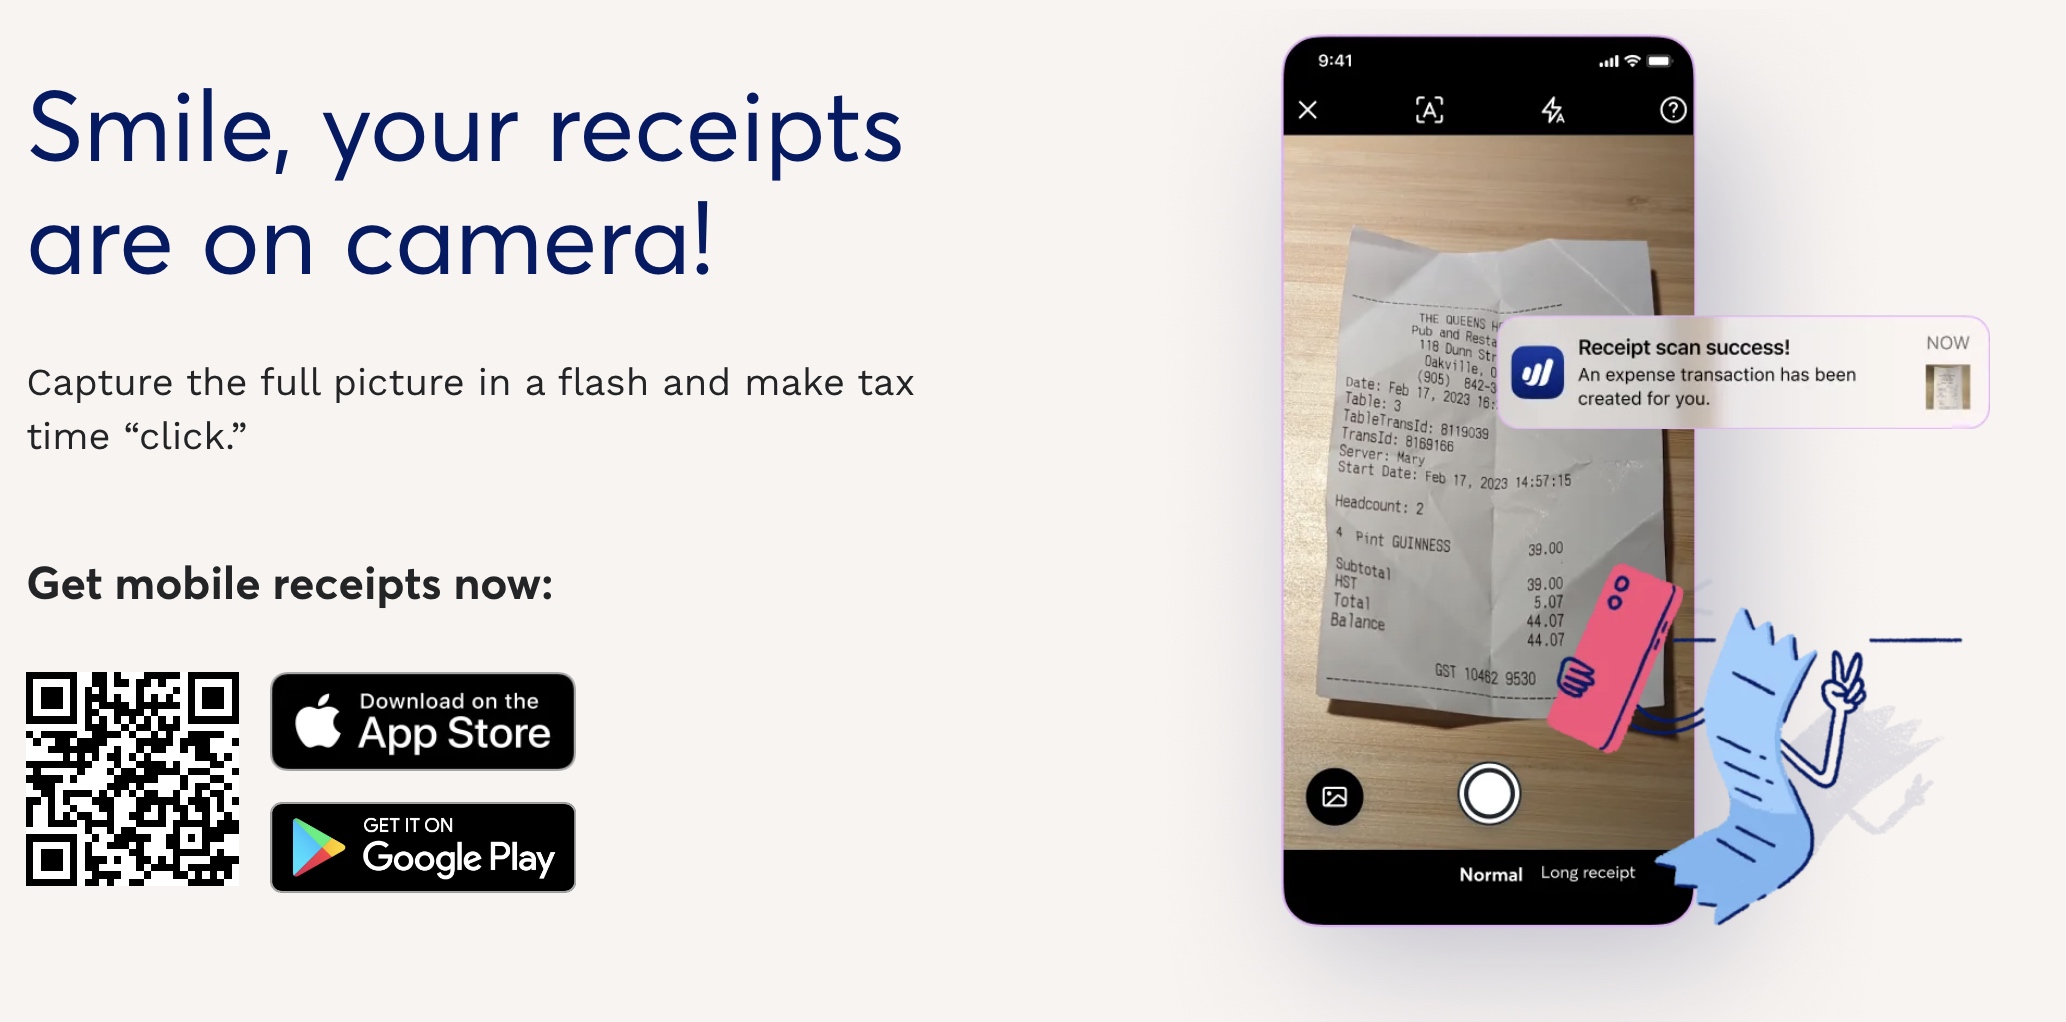 Wave - The Best Receipt Scanner Apps for Small Business Owners - Relay